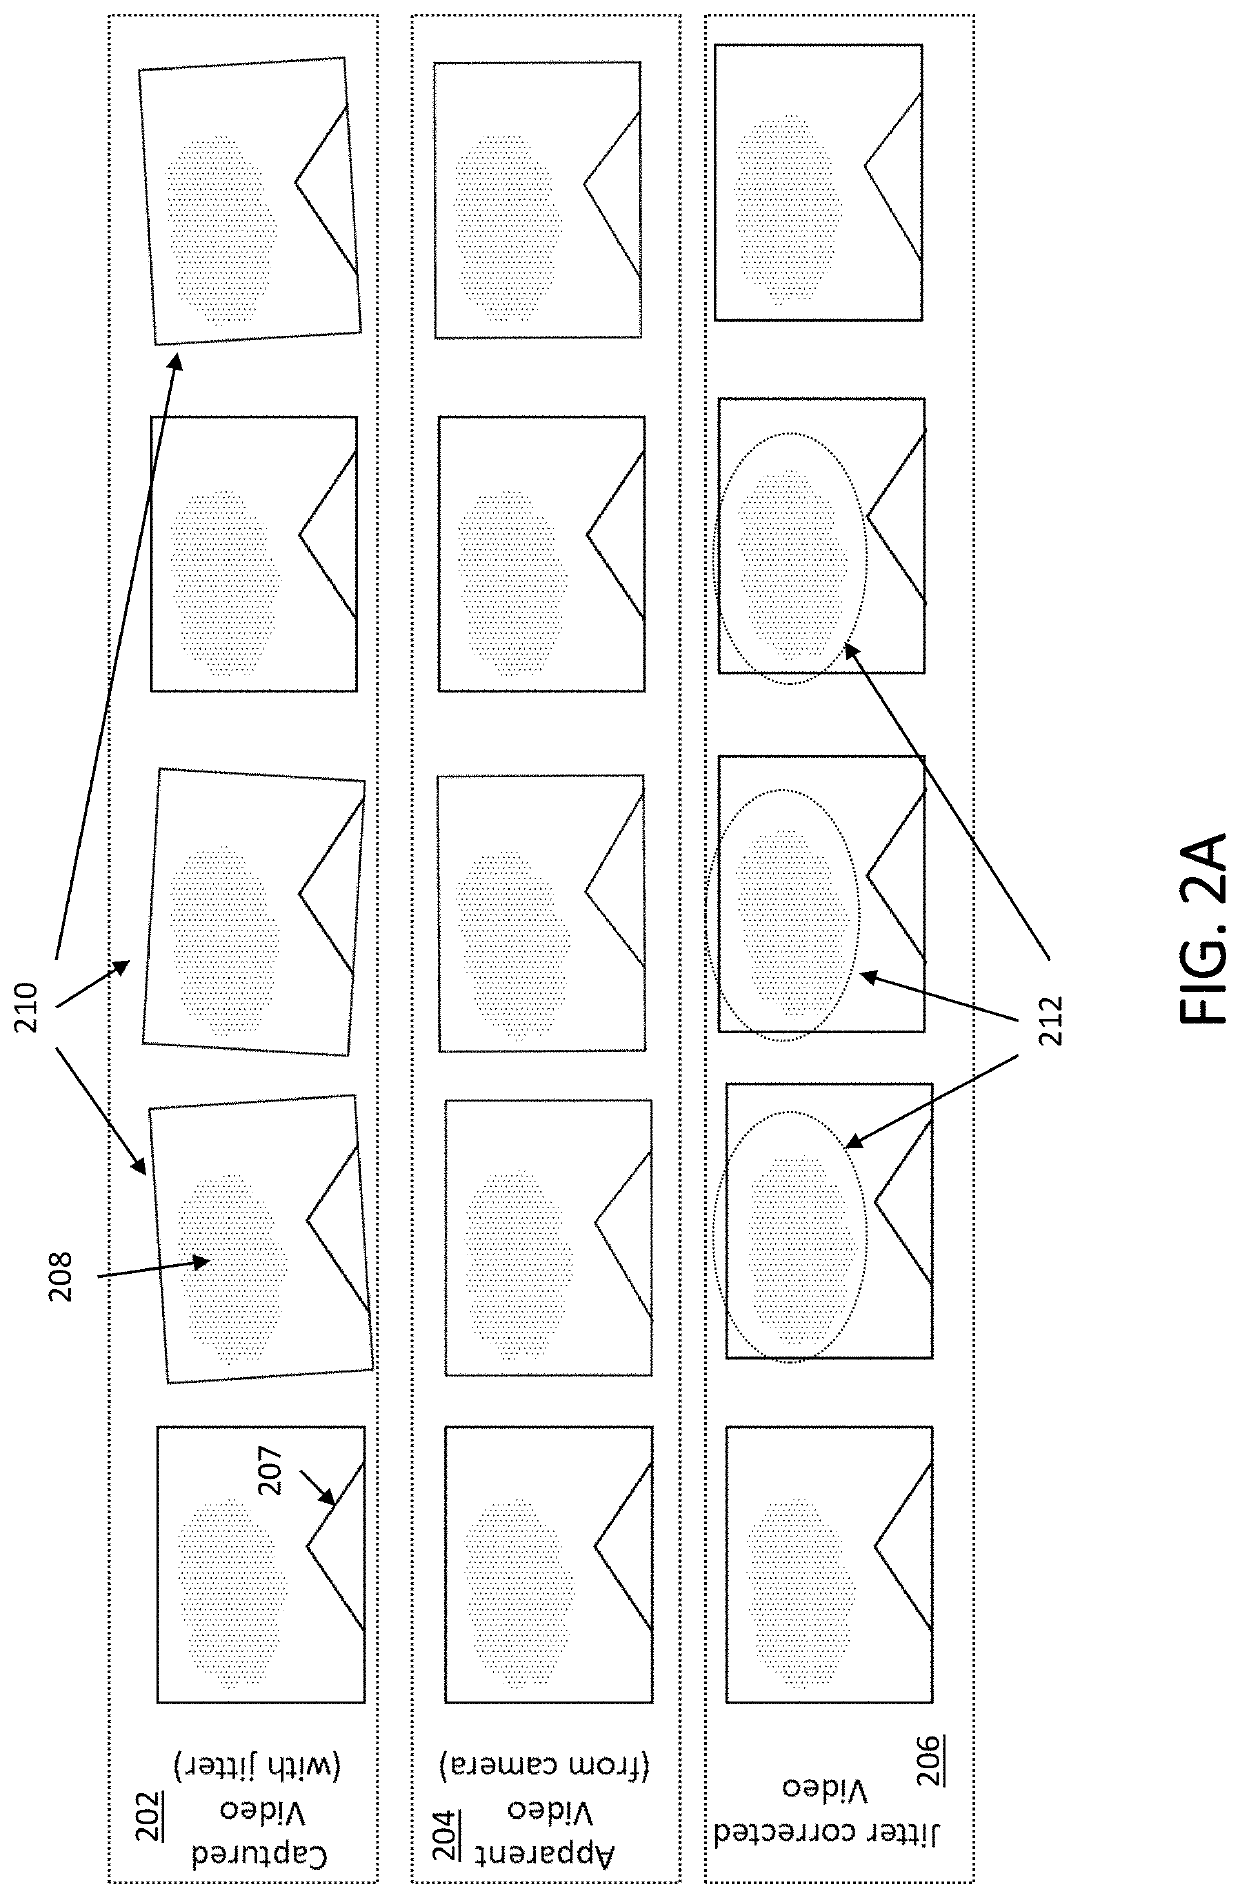 Apparatus and methods for pre-processing and stabilization of captured image data